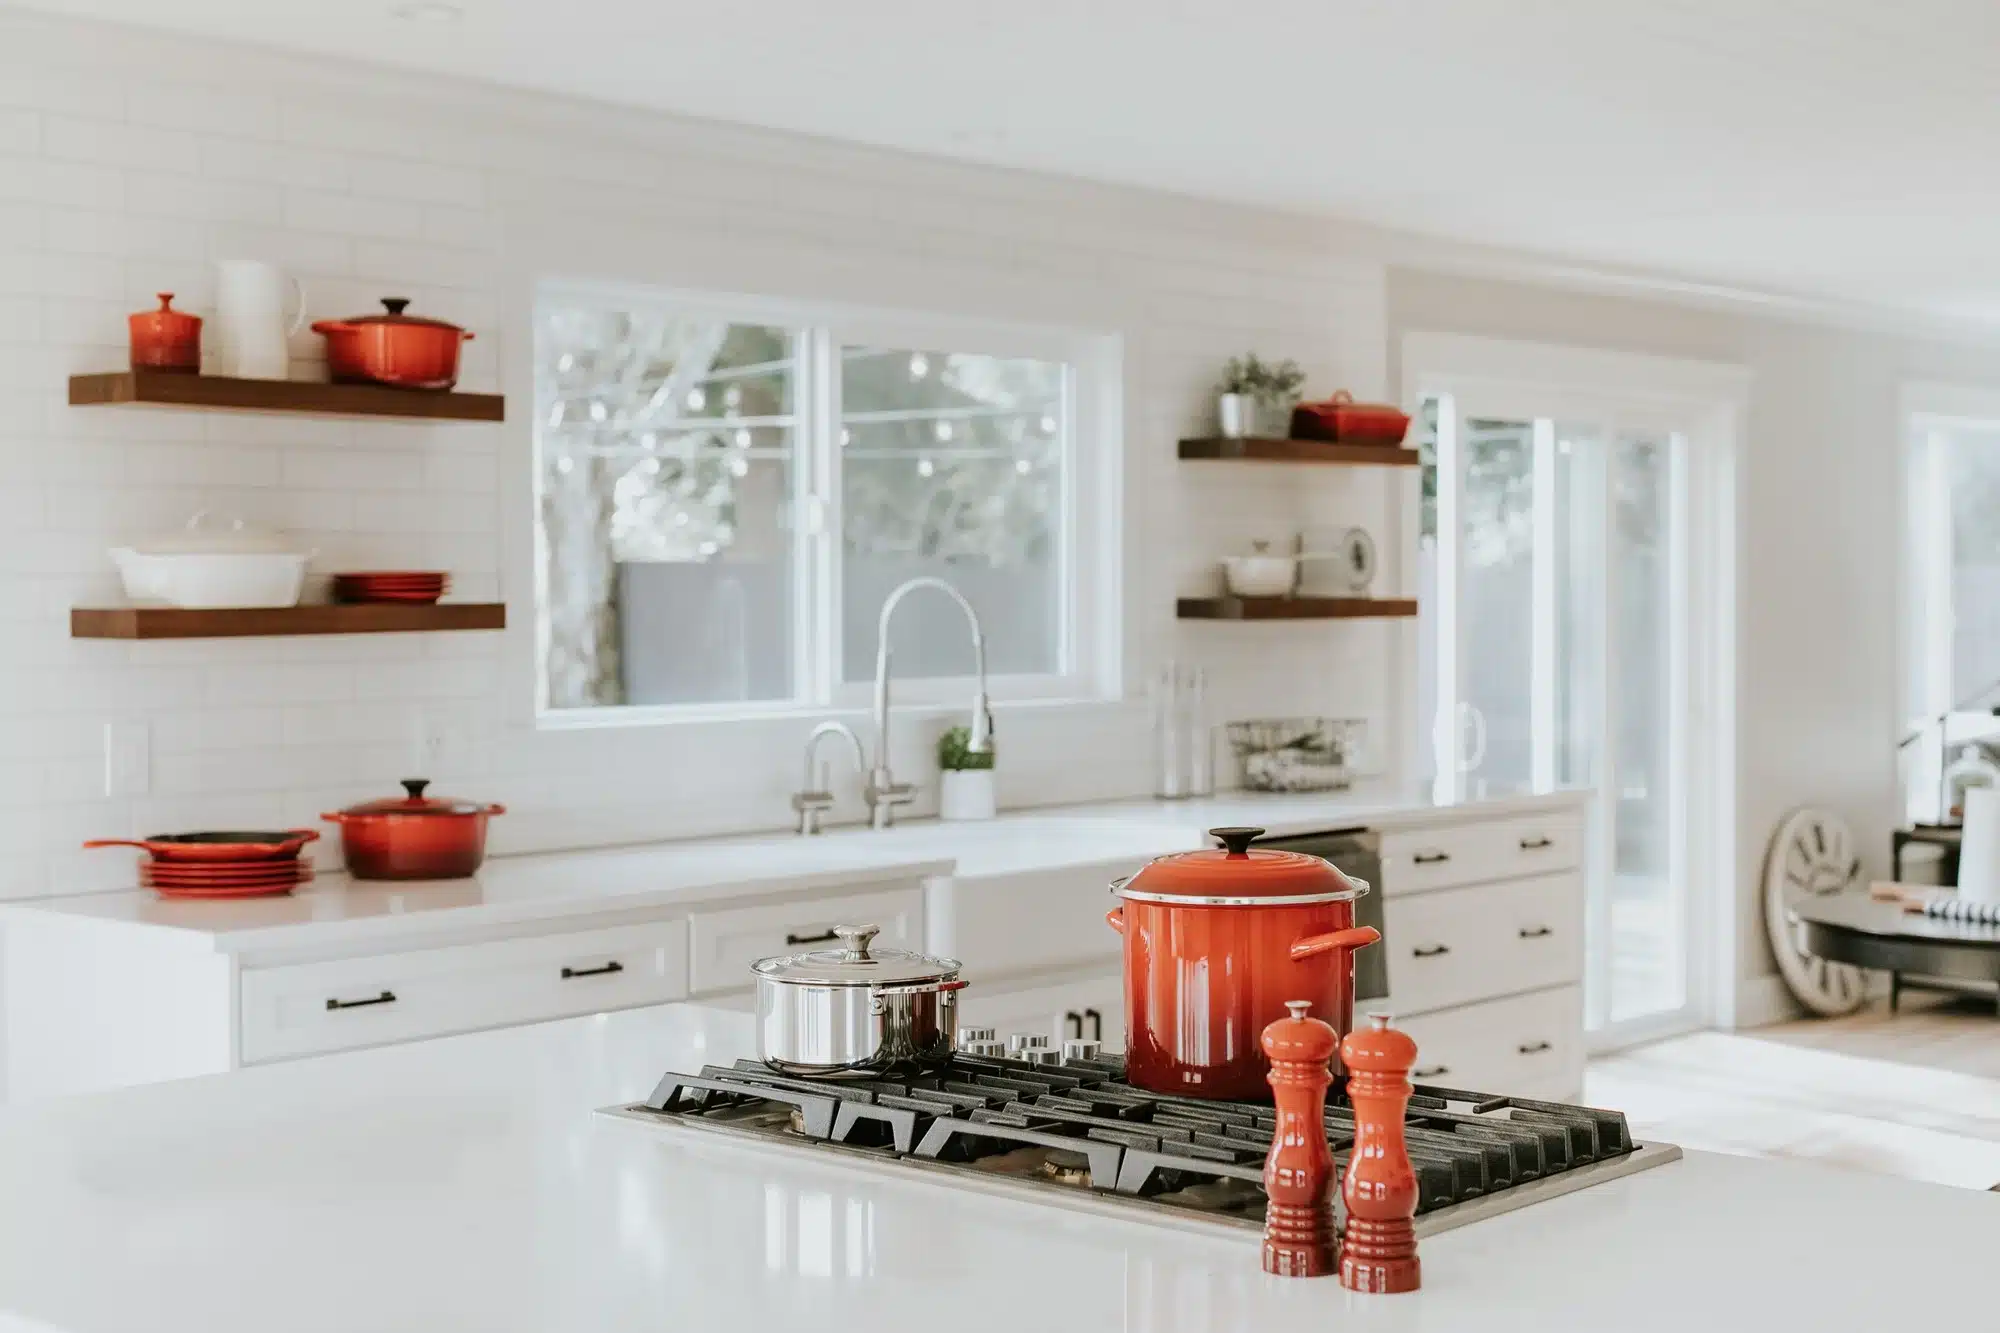 A country-style kitchen, representing the concept of family trust.